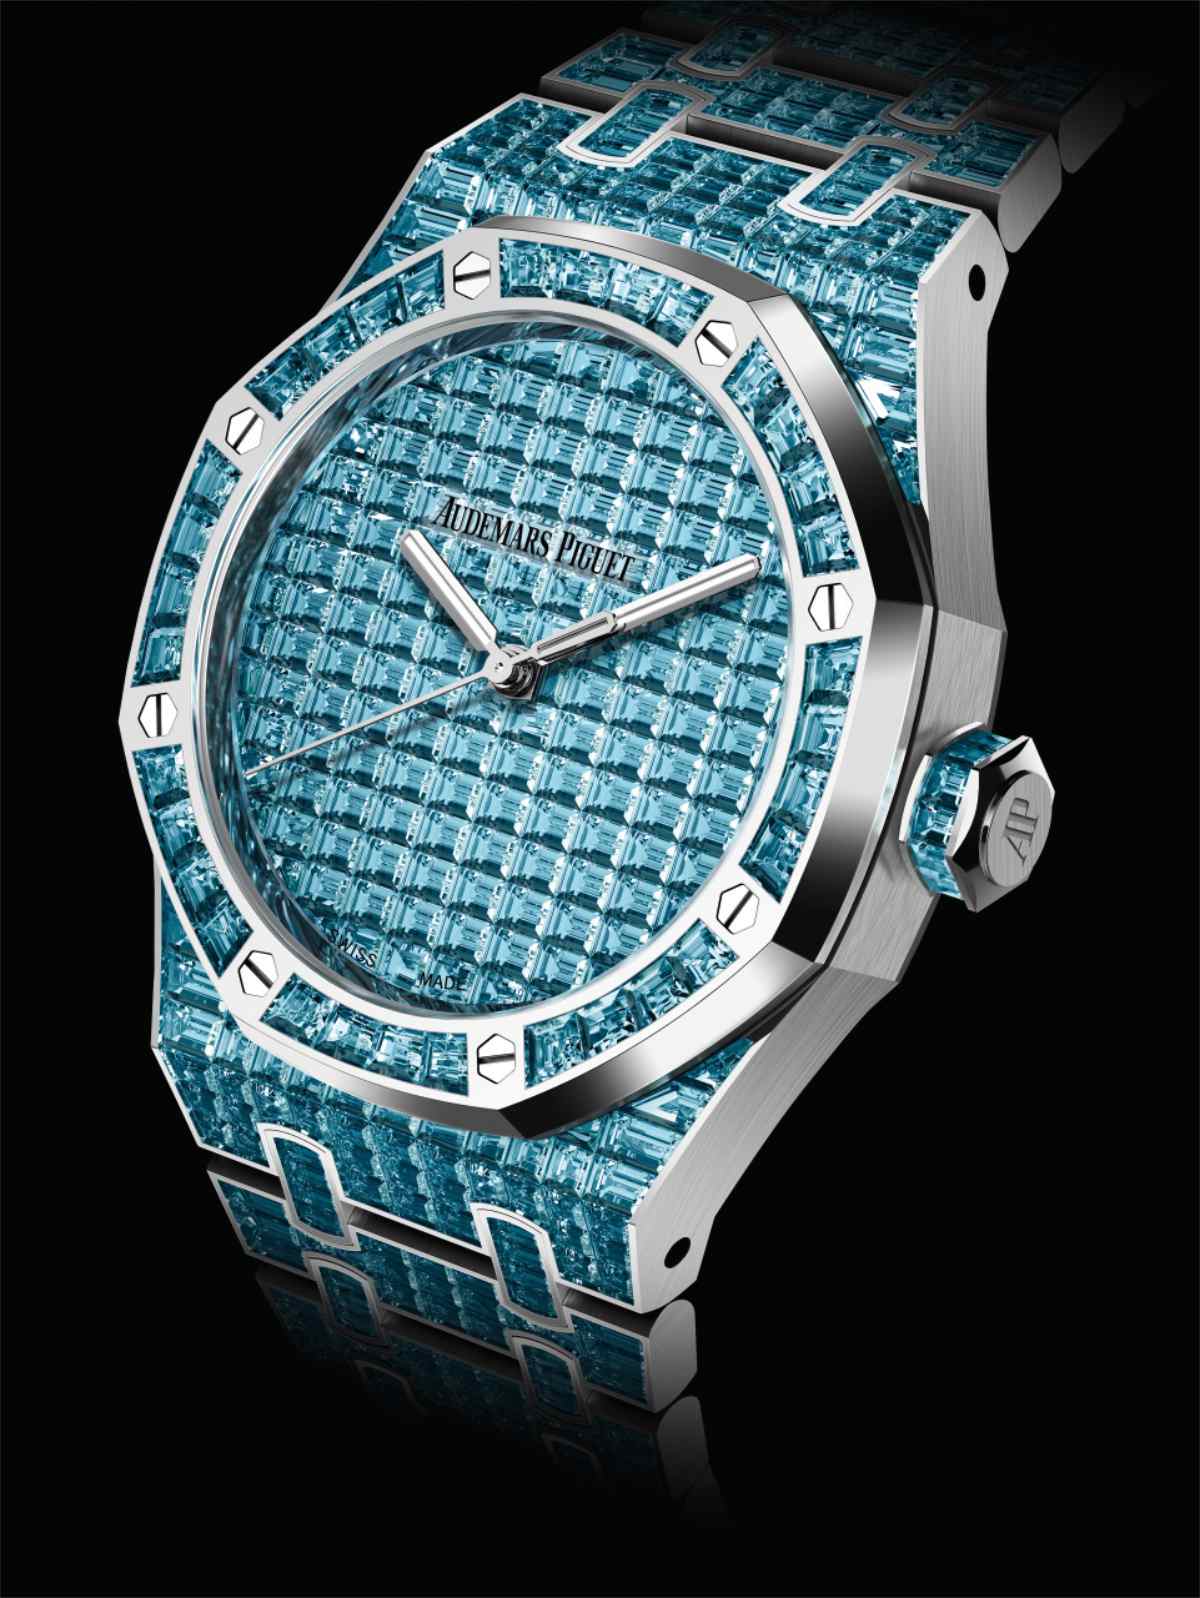 Audemars Piguet Unveiled Two Royal Oak Selfwinding Sets Shimmering With Iridescent Coloured Gemstone